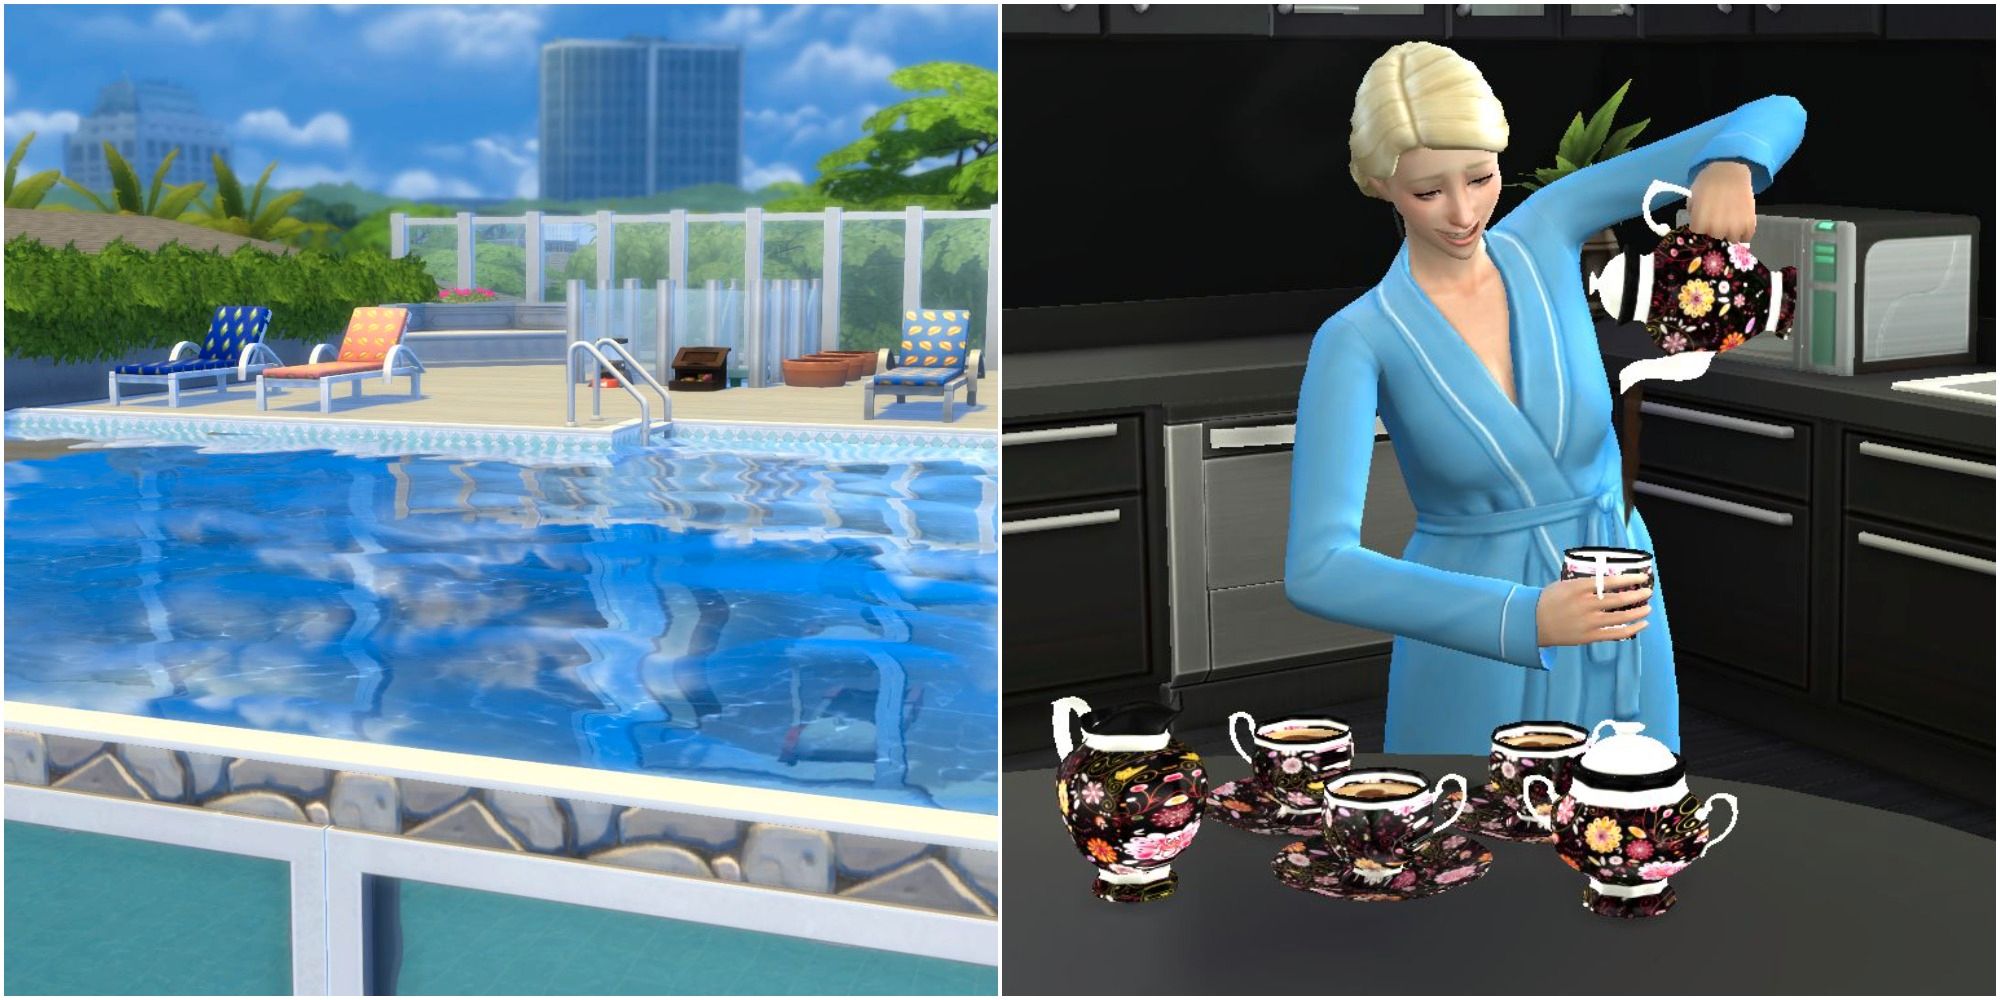 The Sims 4: 10 tips til at holde dine simmere glade